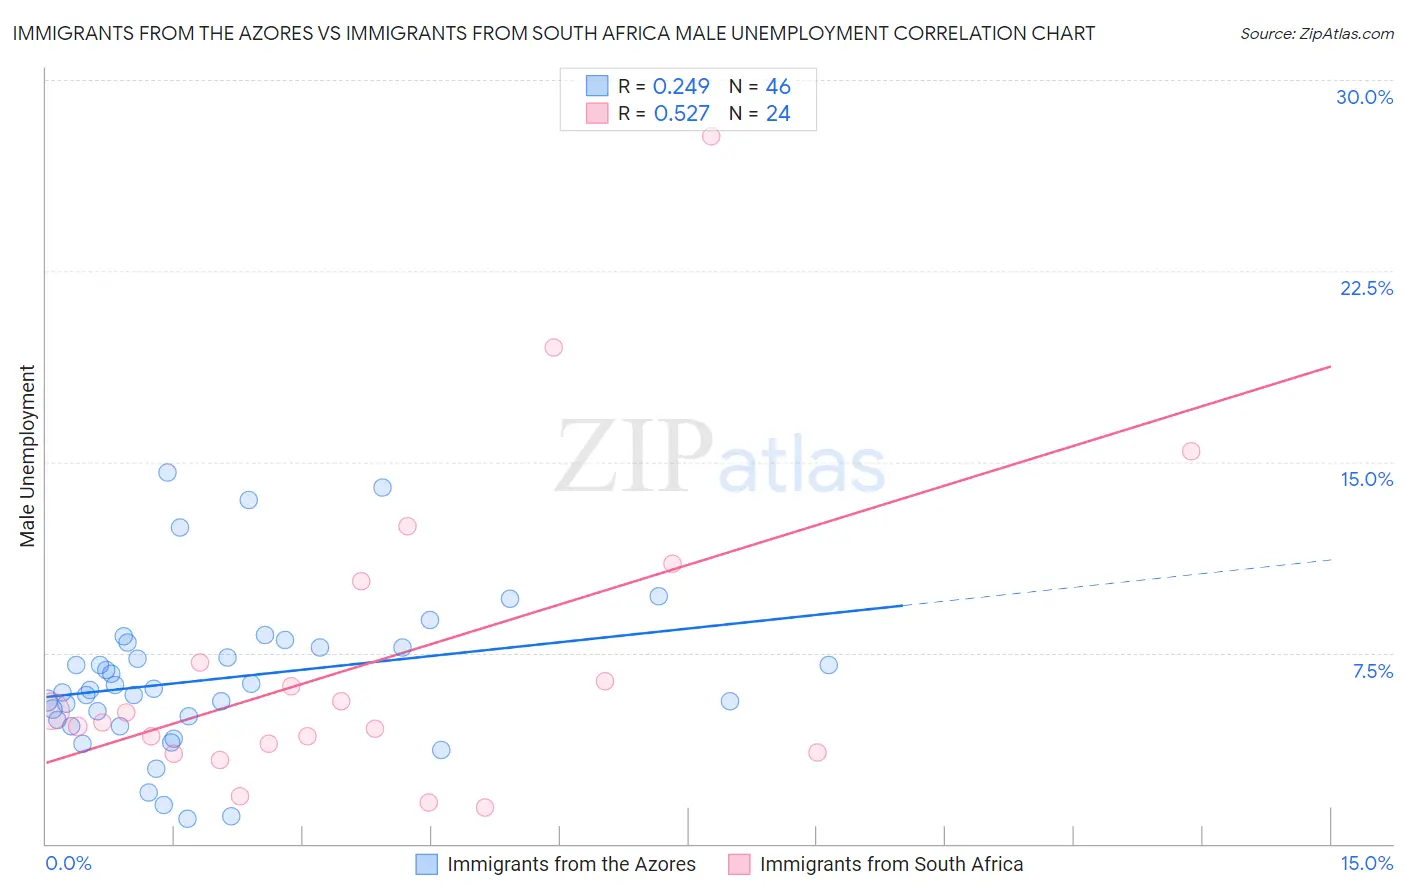 Immigrants from the Azores vs Immigrants from South Africa Male Unemployment